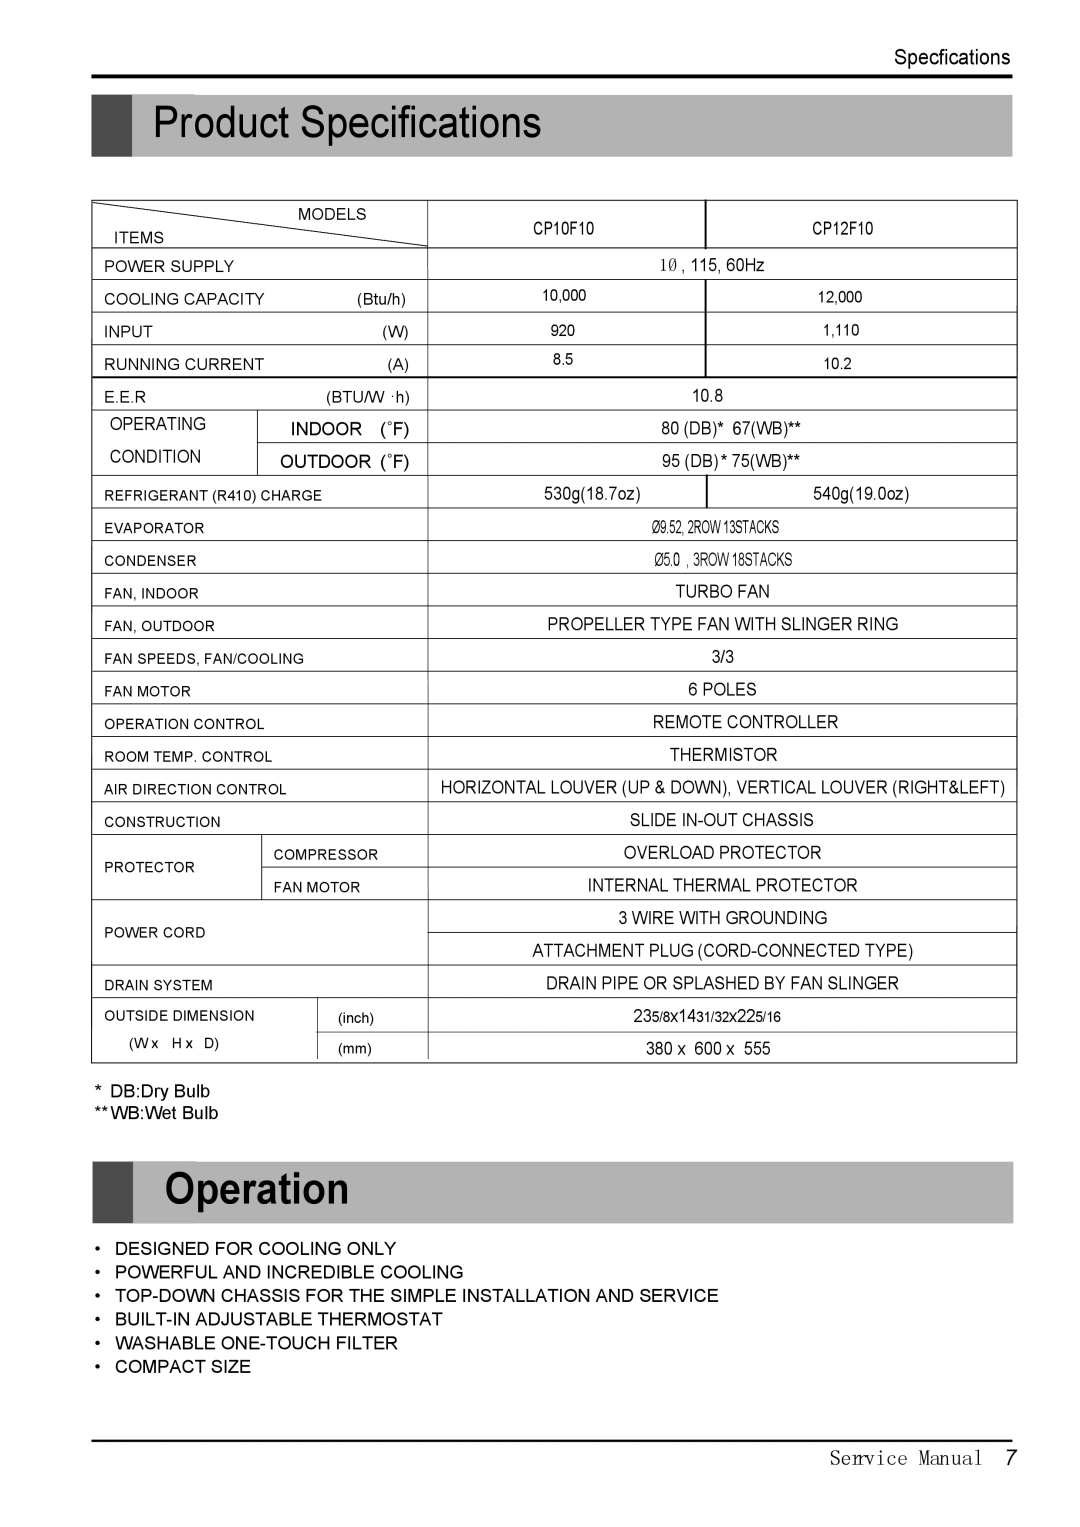 Friedrich CP10F10, CP12F10 manual Product Specifications, Operation, Serrvice Manual 